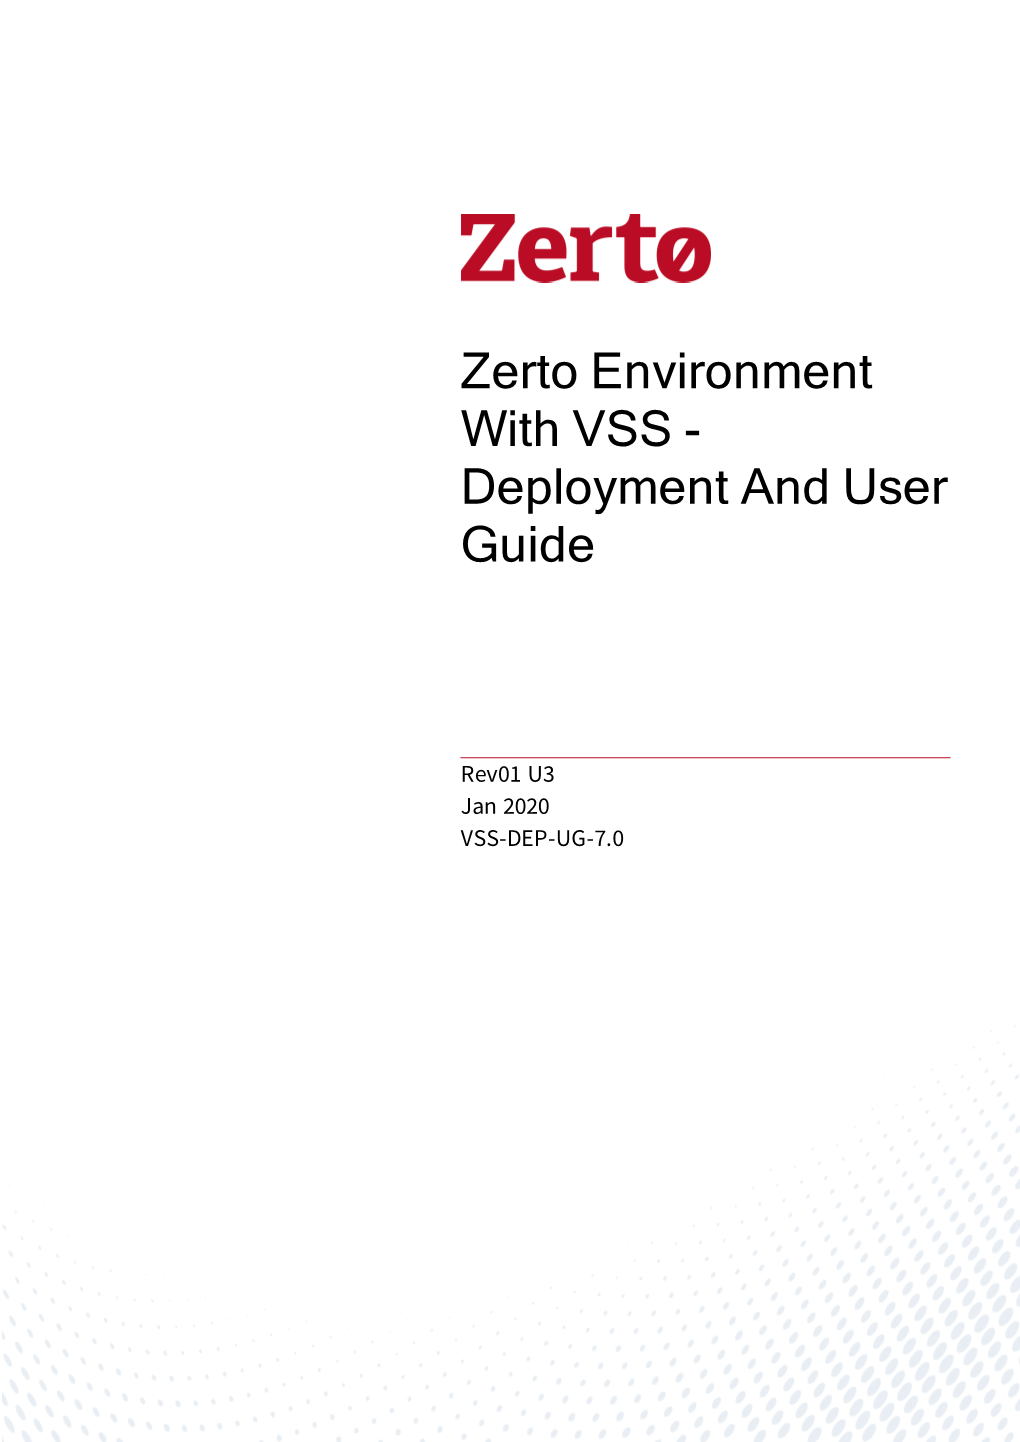 Zerto Environment with VSS - Deployment and User Guide